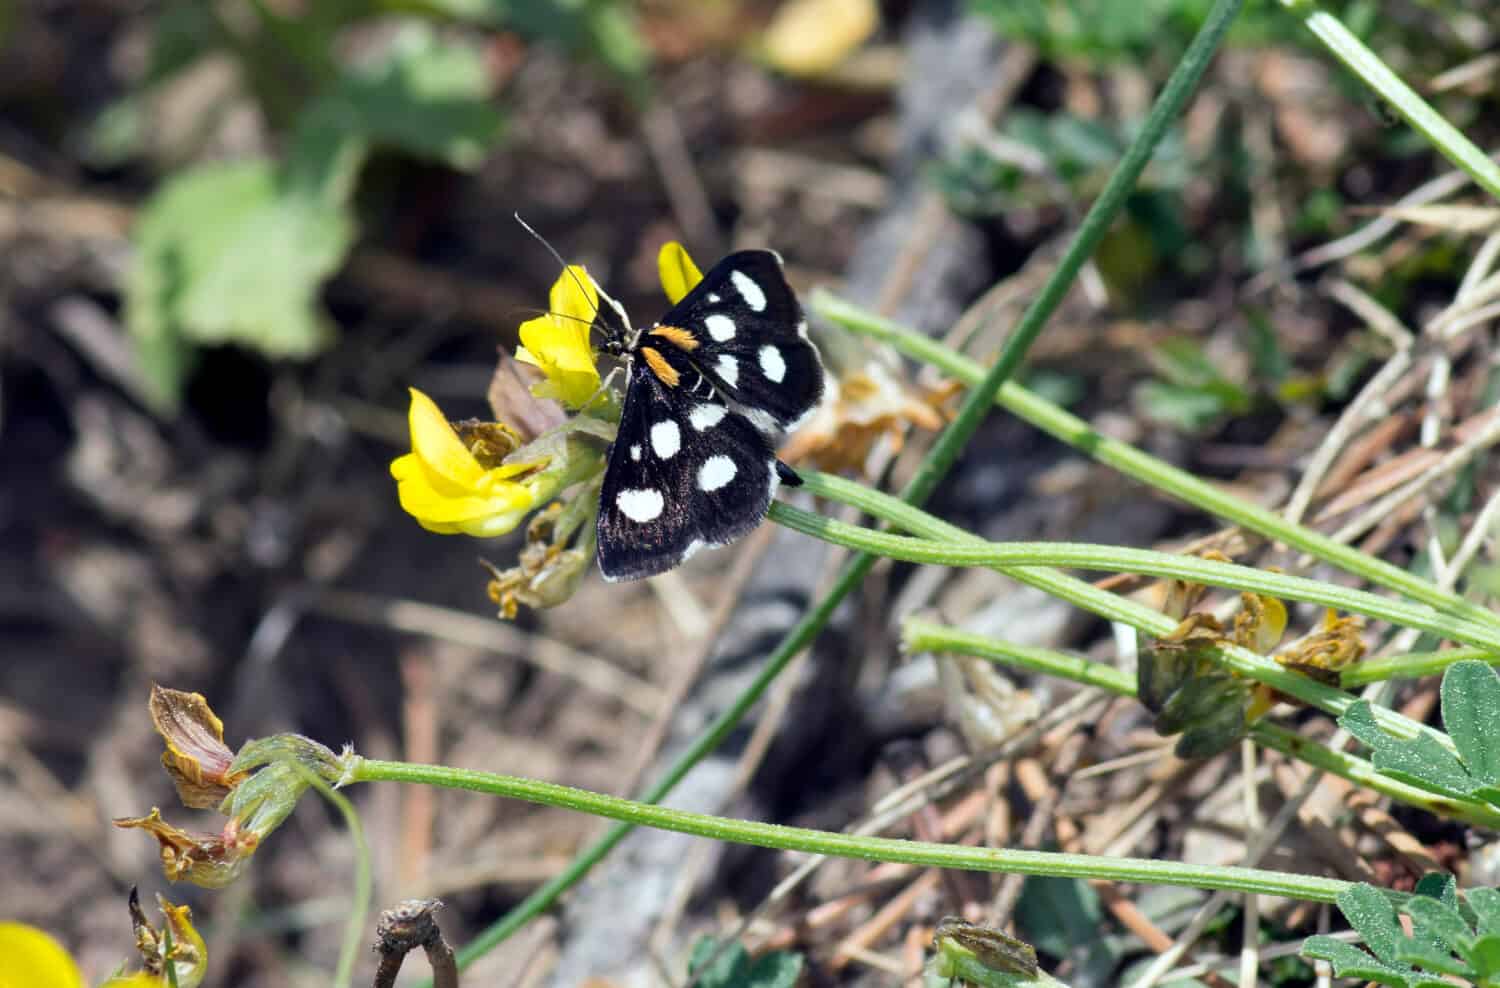 White-spotted Sable Moth (Anania funebris)